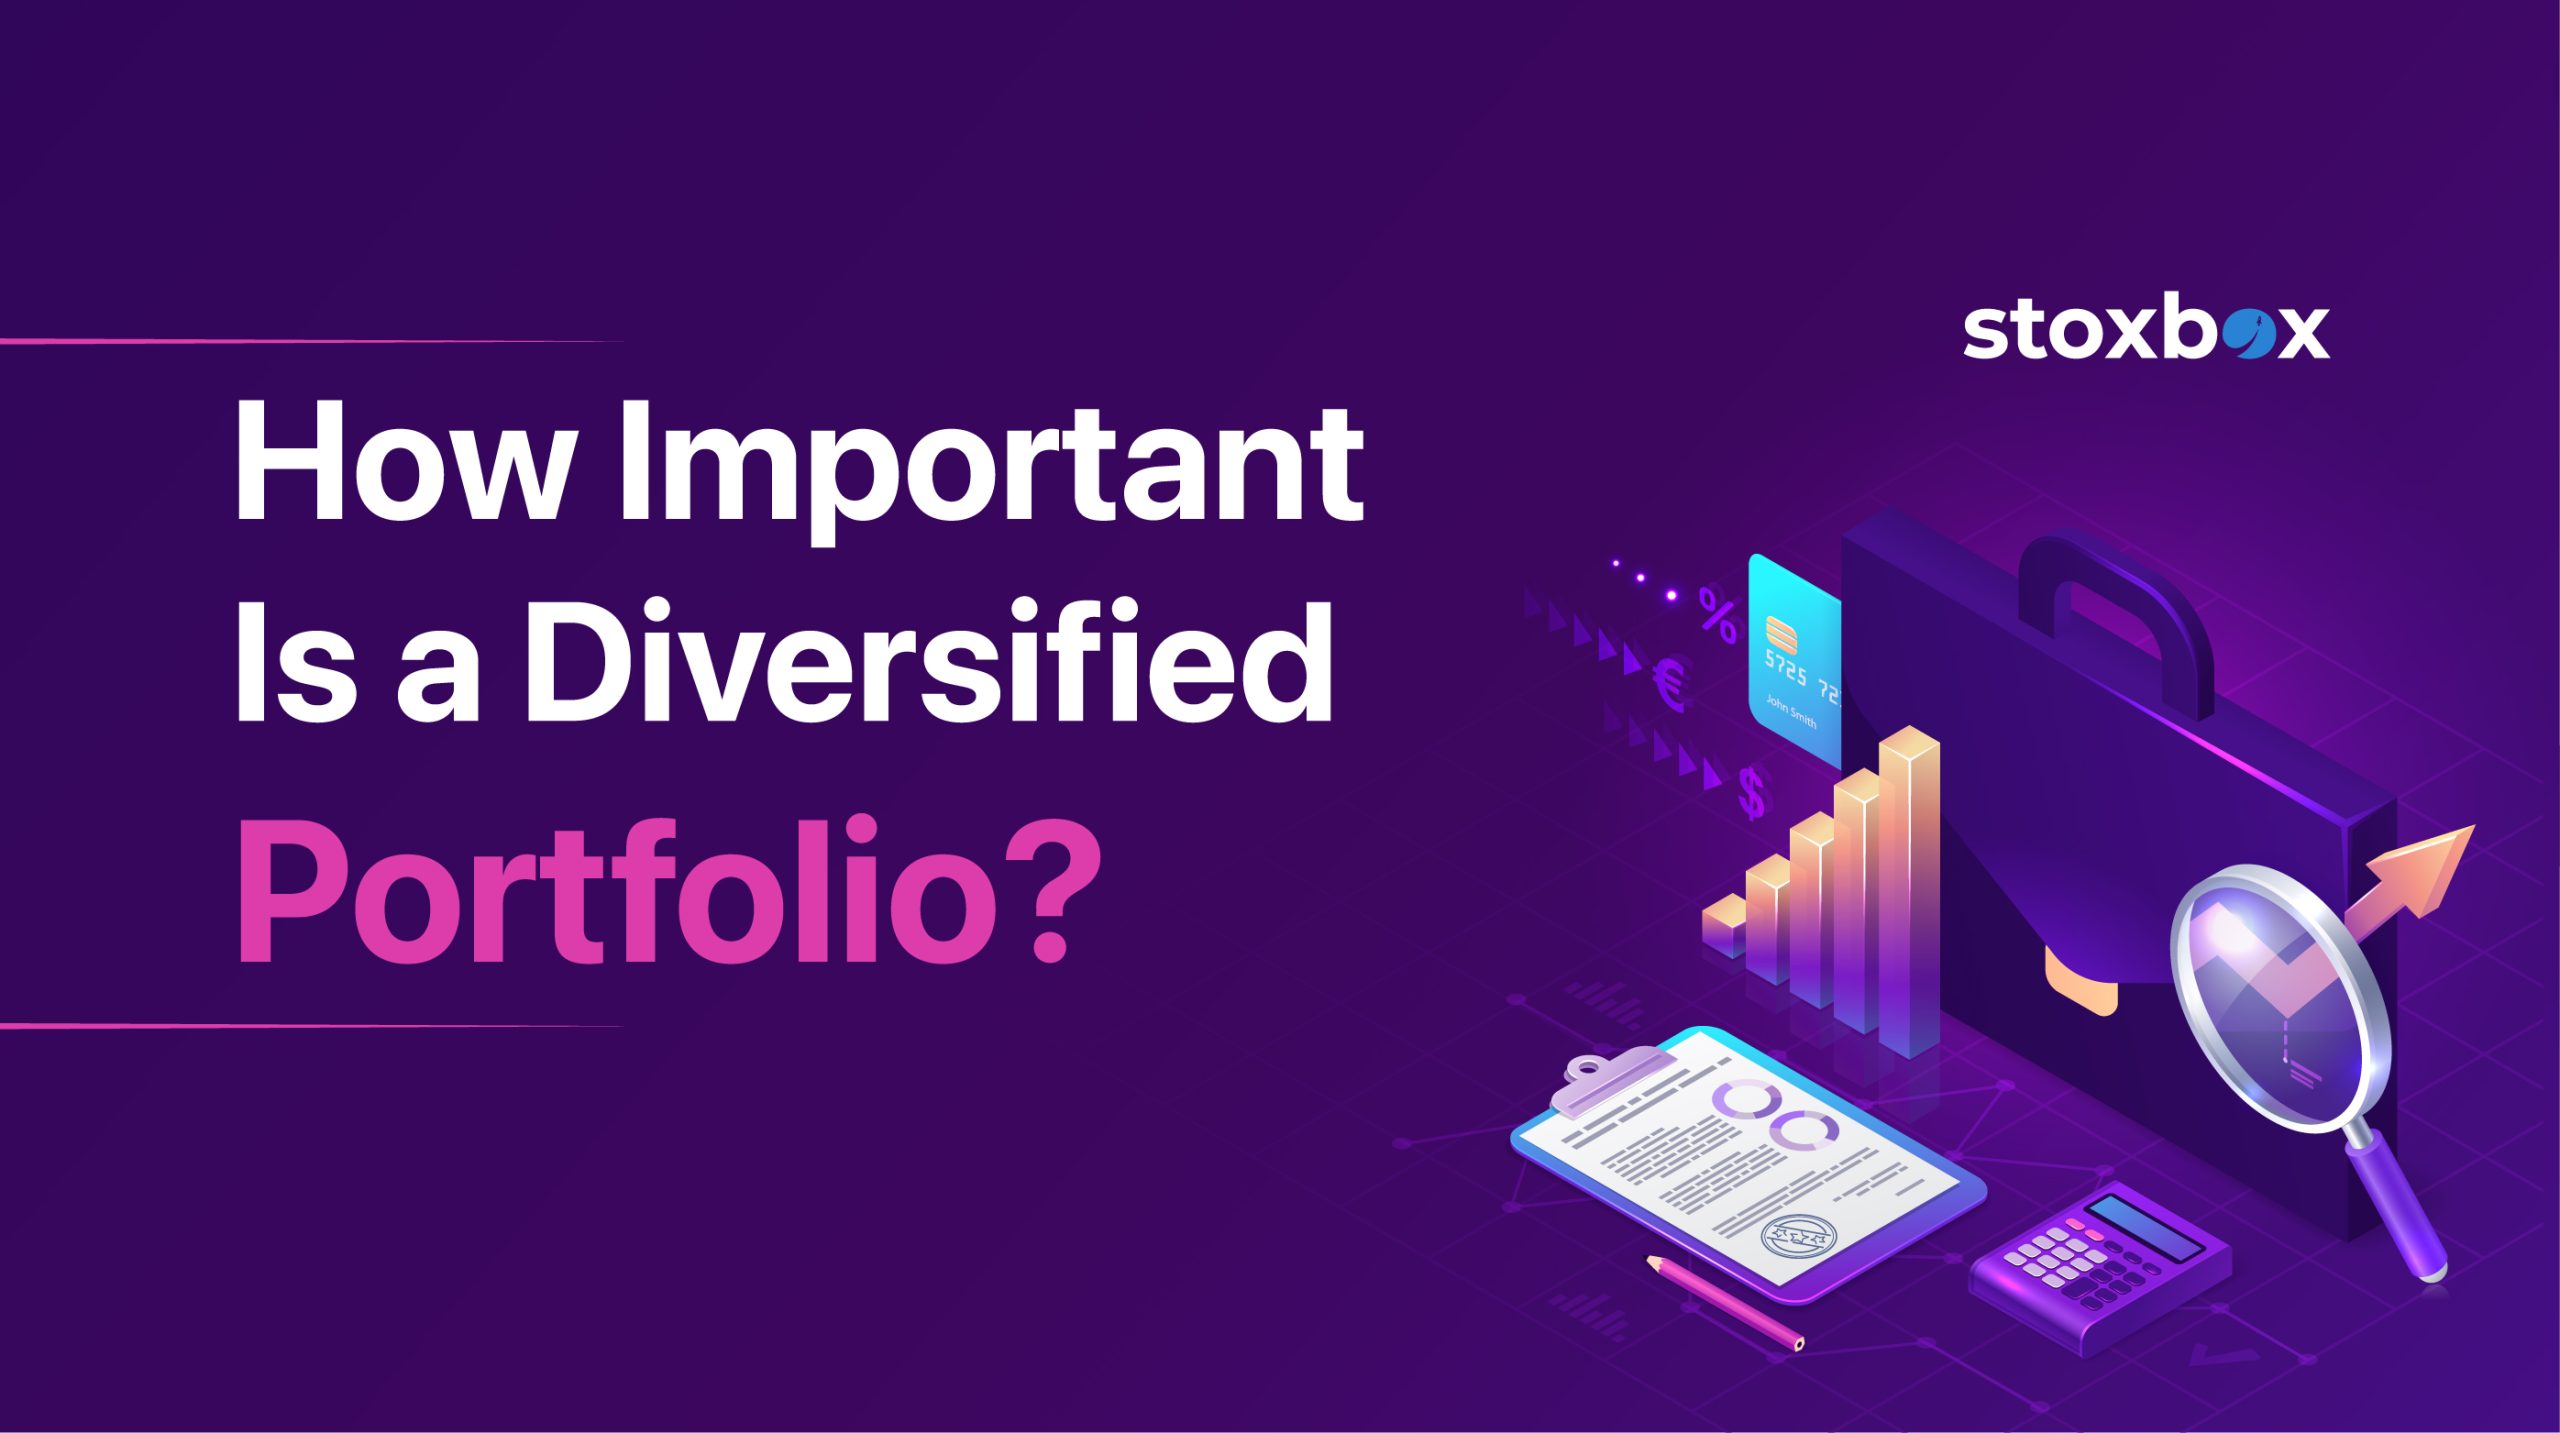 How Important Is a Diversified Portfolio